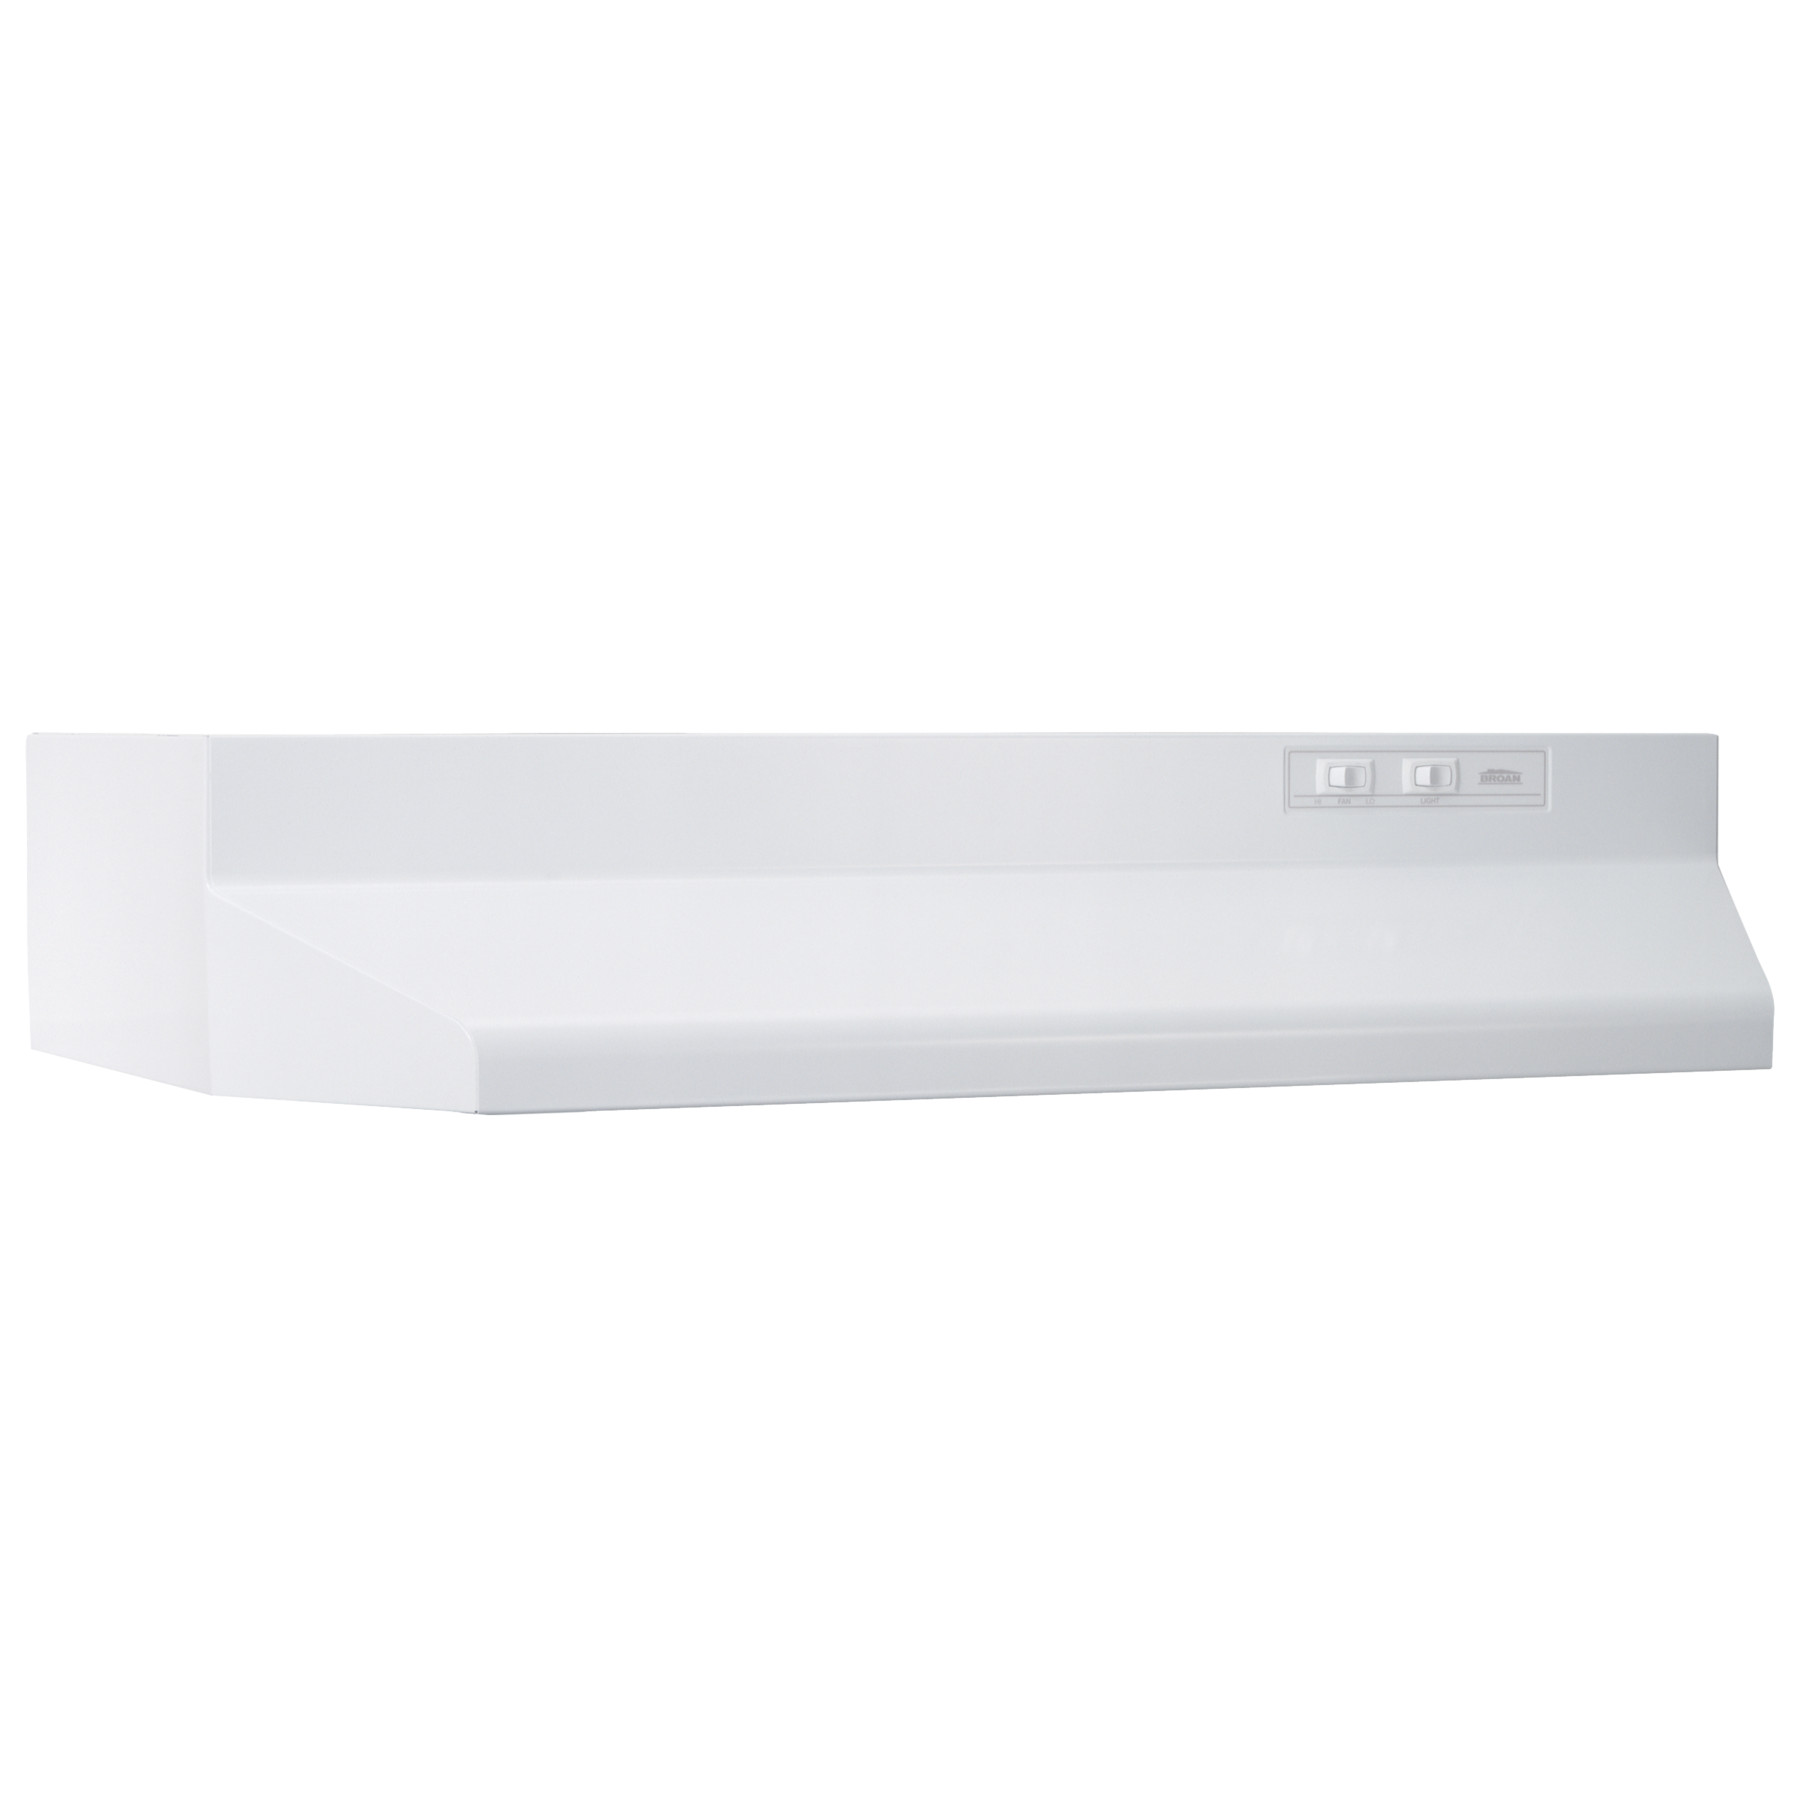 Broan® 36-Inch Ducted Under-Cabinet Range Hood w/ Easy Install System, 210 Max Blower CFM, White